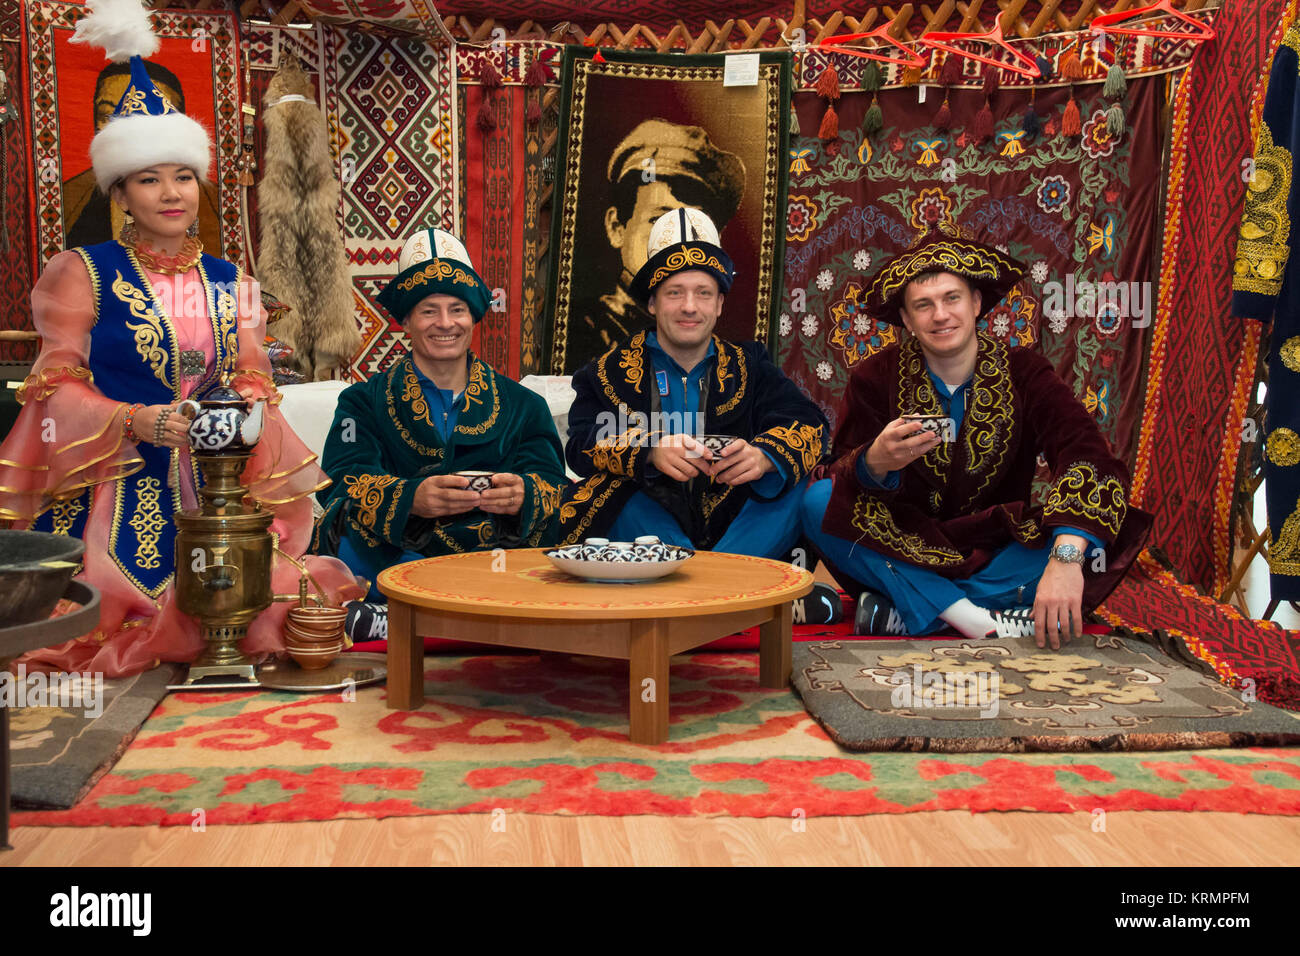 Wearing native garb, Expedition 49 backup crewmembers Mark Vande Hei of NASA and Alexander Misurkin and Nikolai Tikhonov of Roscosmos enjoy a cup a tea in a traditional Kazakh setting at a local museum Sept. 10 while on a tour of the city of Baikonur, Kazakhstan. They are serving as backups to Shane Kimbrough of NASA and Sergey Ryzhikov and Andrey Borisenko of Roscosmos, who will launch on Sept. 24, Kazakh time from the Baikonur Cosmodrome in Kazakhstan on the Soyuz MS-02 vehicle for a five-month mission on the International Space Station.  NASA/Victor Zelentsov Soyuz MS-02 backup crew during  Stock Photo